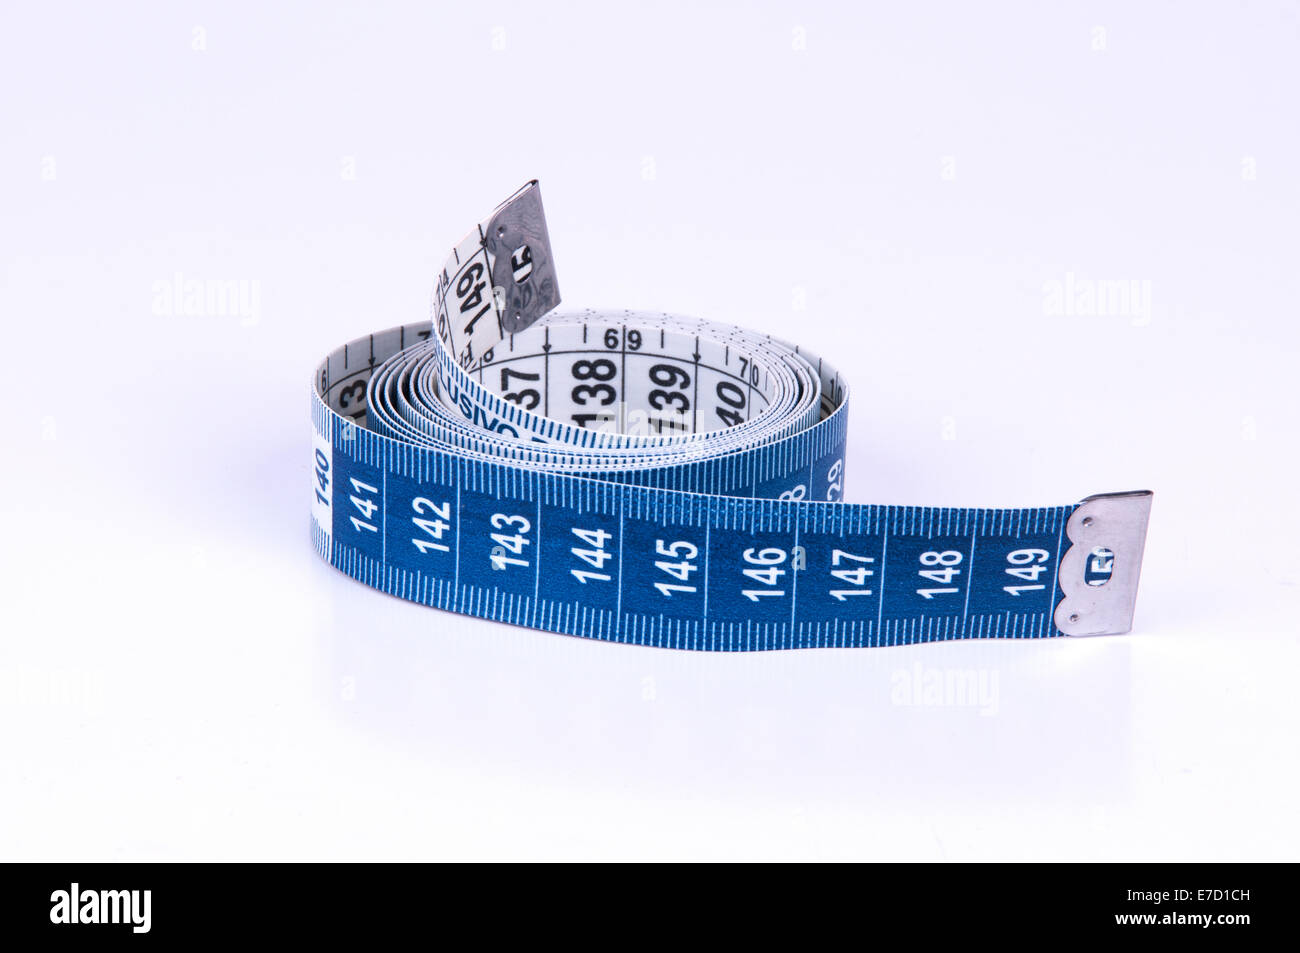 https://c8.alamy.com/comp/E7D1CH/a-tape-measure-or-measuring-tape-is-a-flexible-ruler-on-white-background-E7D1CH.jpg